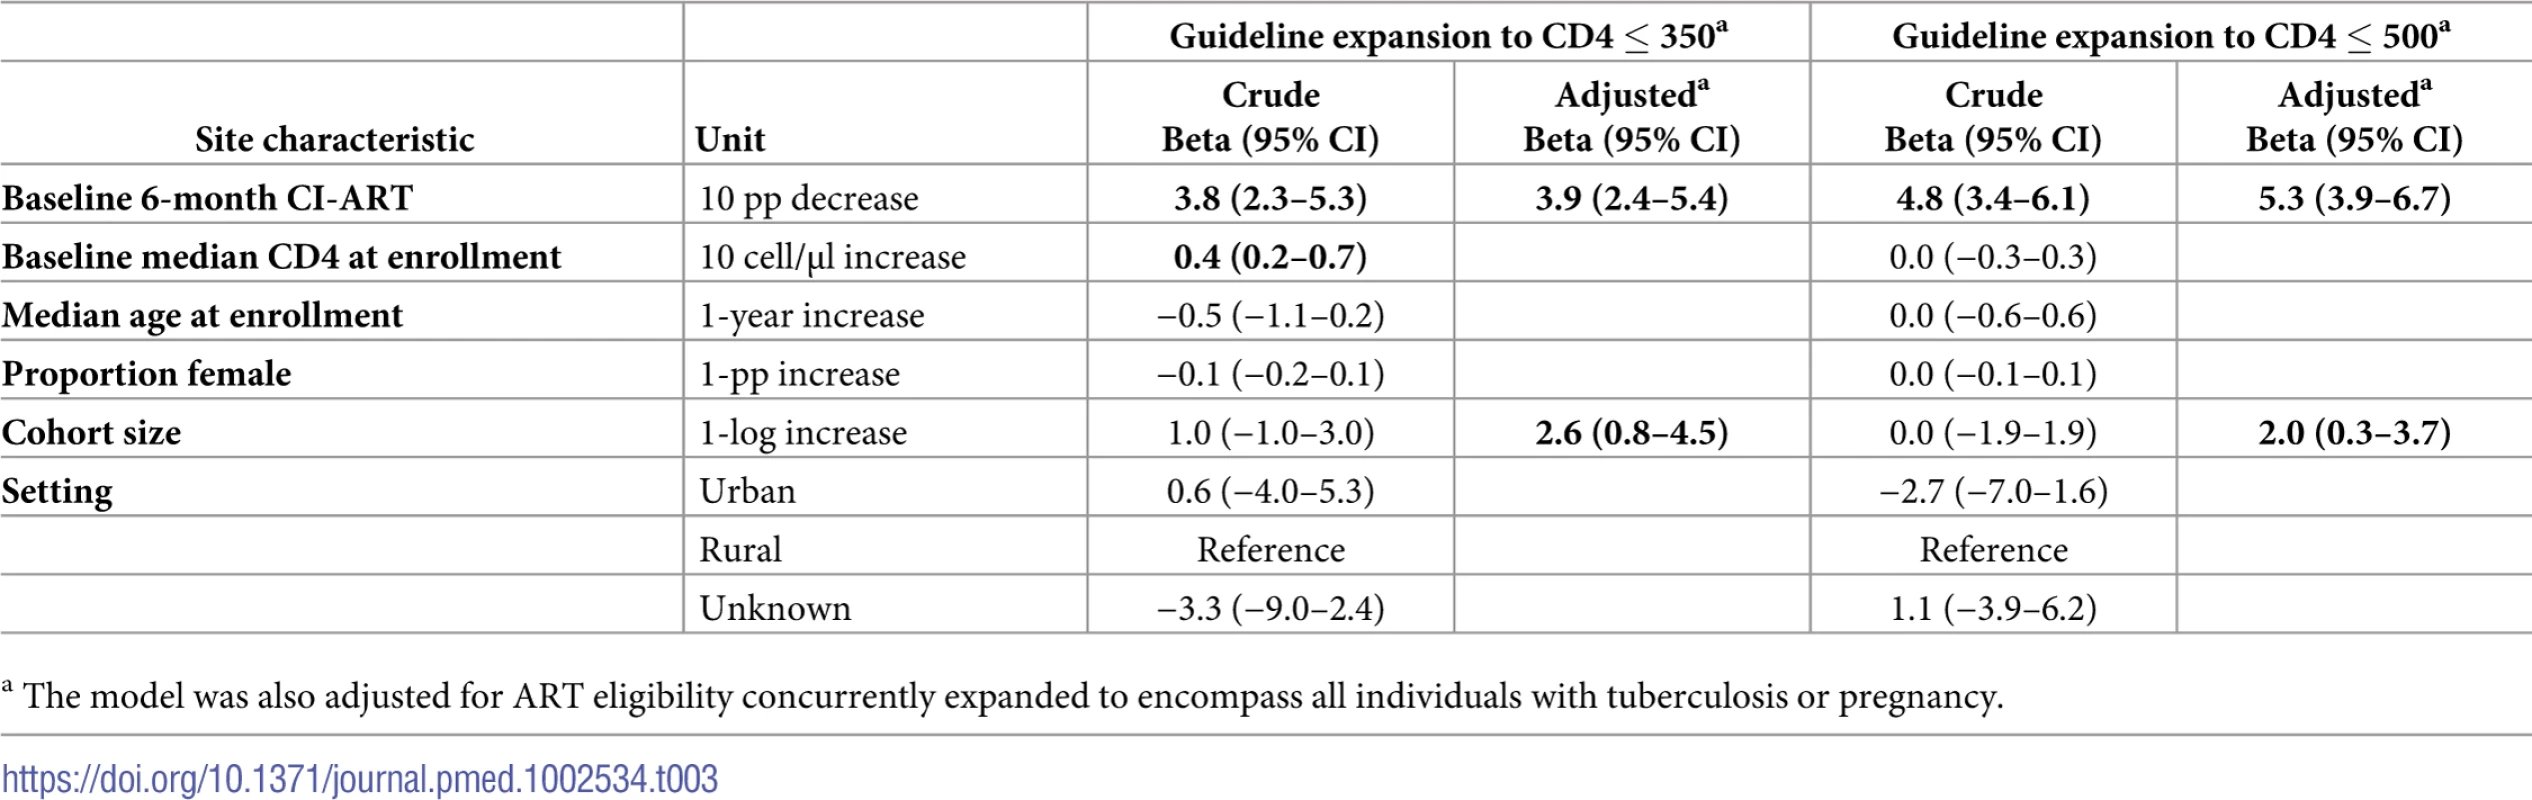 Crude and adjusted metaregression analyses of change in 6-month cumulative incidence of antiretroviral treatment initiation (CI-ART) after ART eligibility guideline expansion to CD4 ≤ 350 and CD4 ≤ 500.